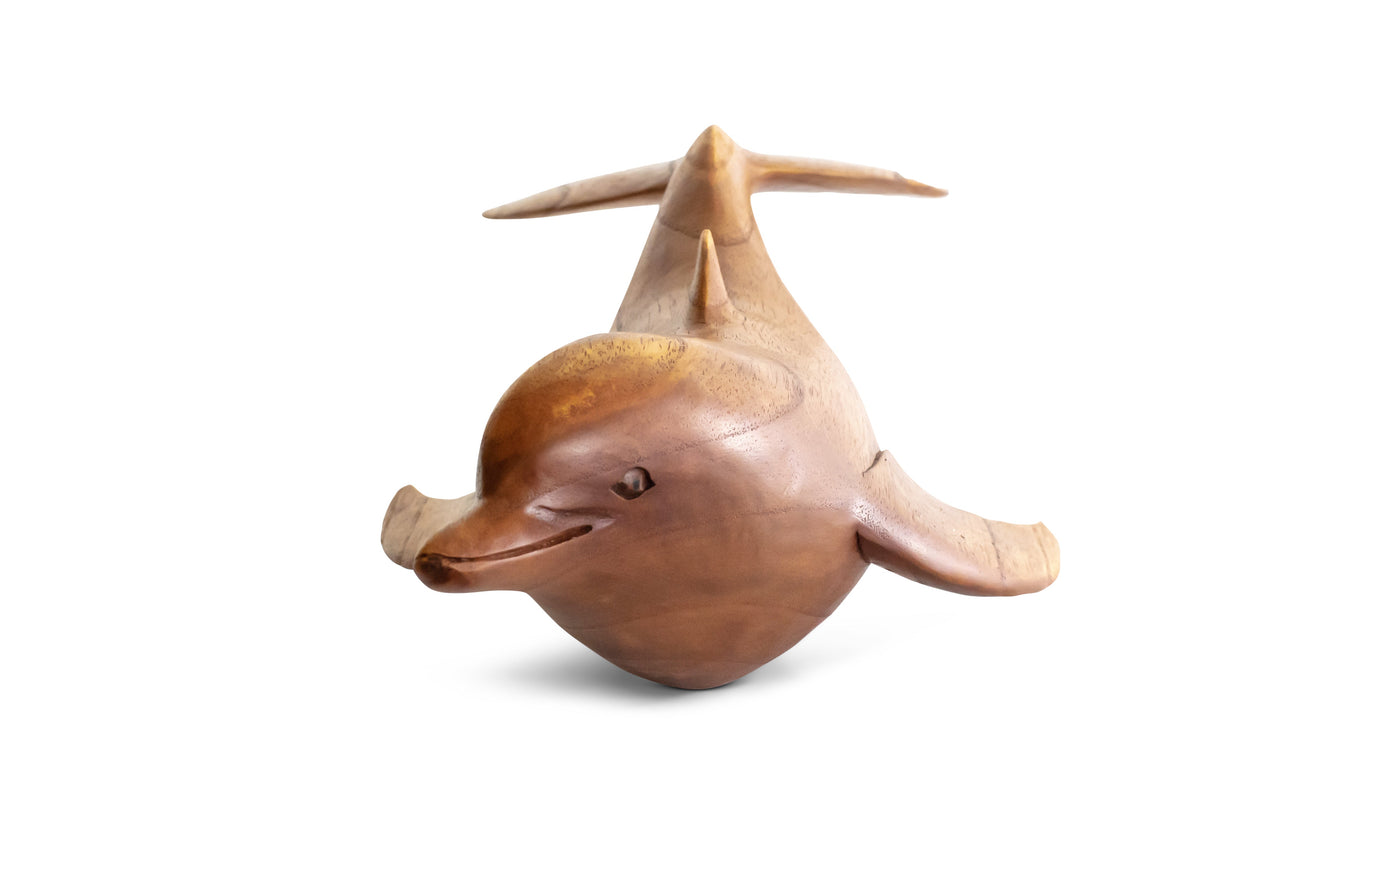 Wooden Hand Carved Swimming Dolphin Statue Sculpture Wood Decorative Decor Fish Figurine Handcrafted Handmade Seaside Tropical Nautical Ocean Coastal